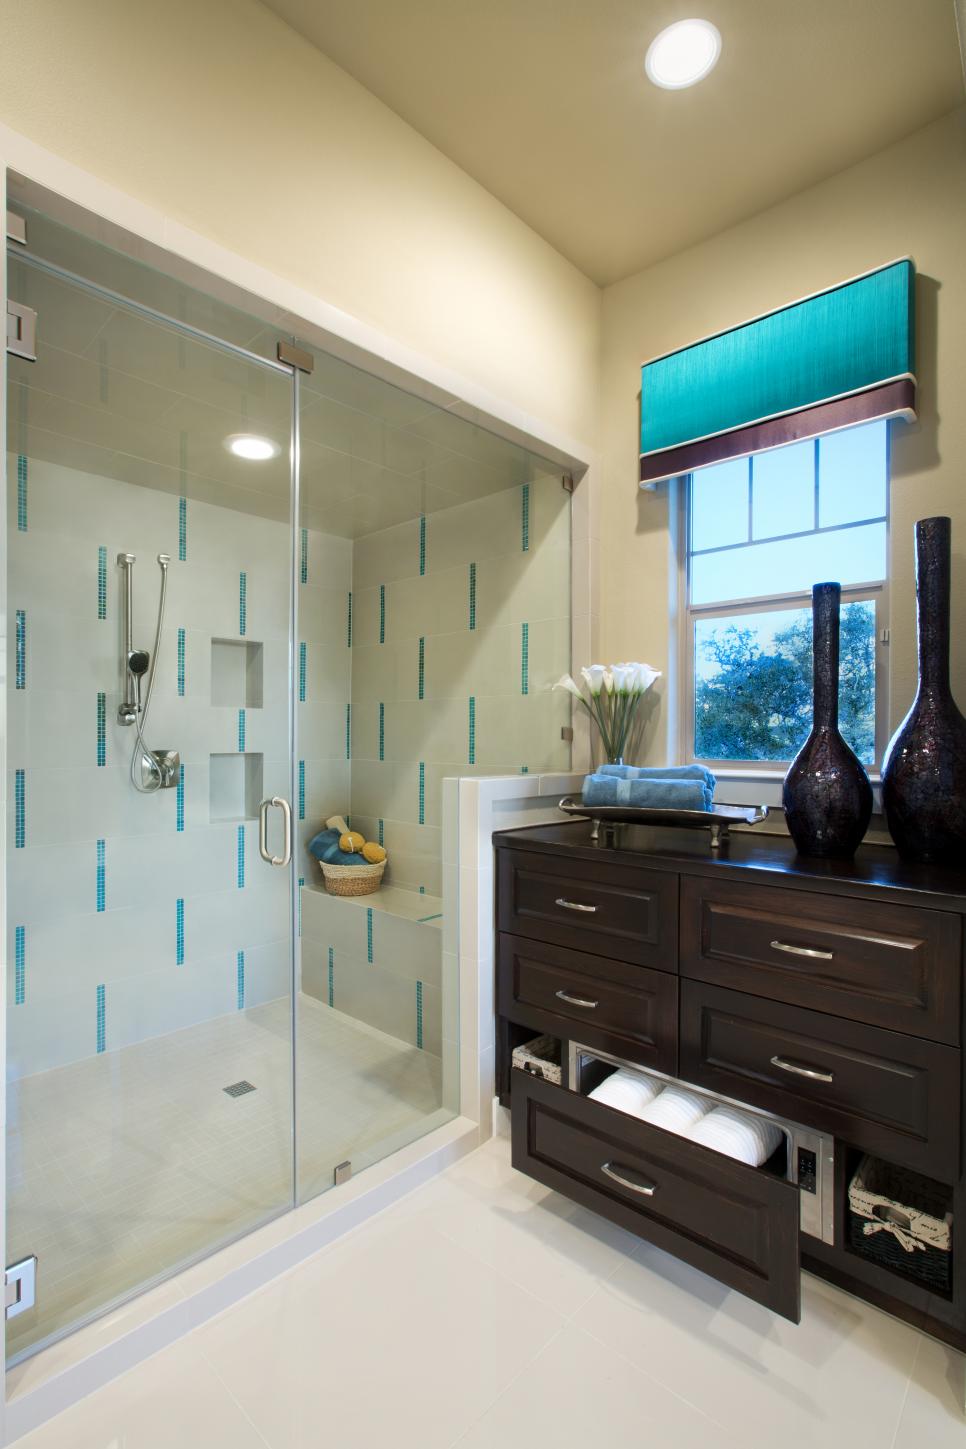 Asian-Inspired Bathroom in Turquoise and Brown | HGTV